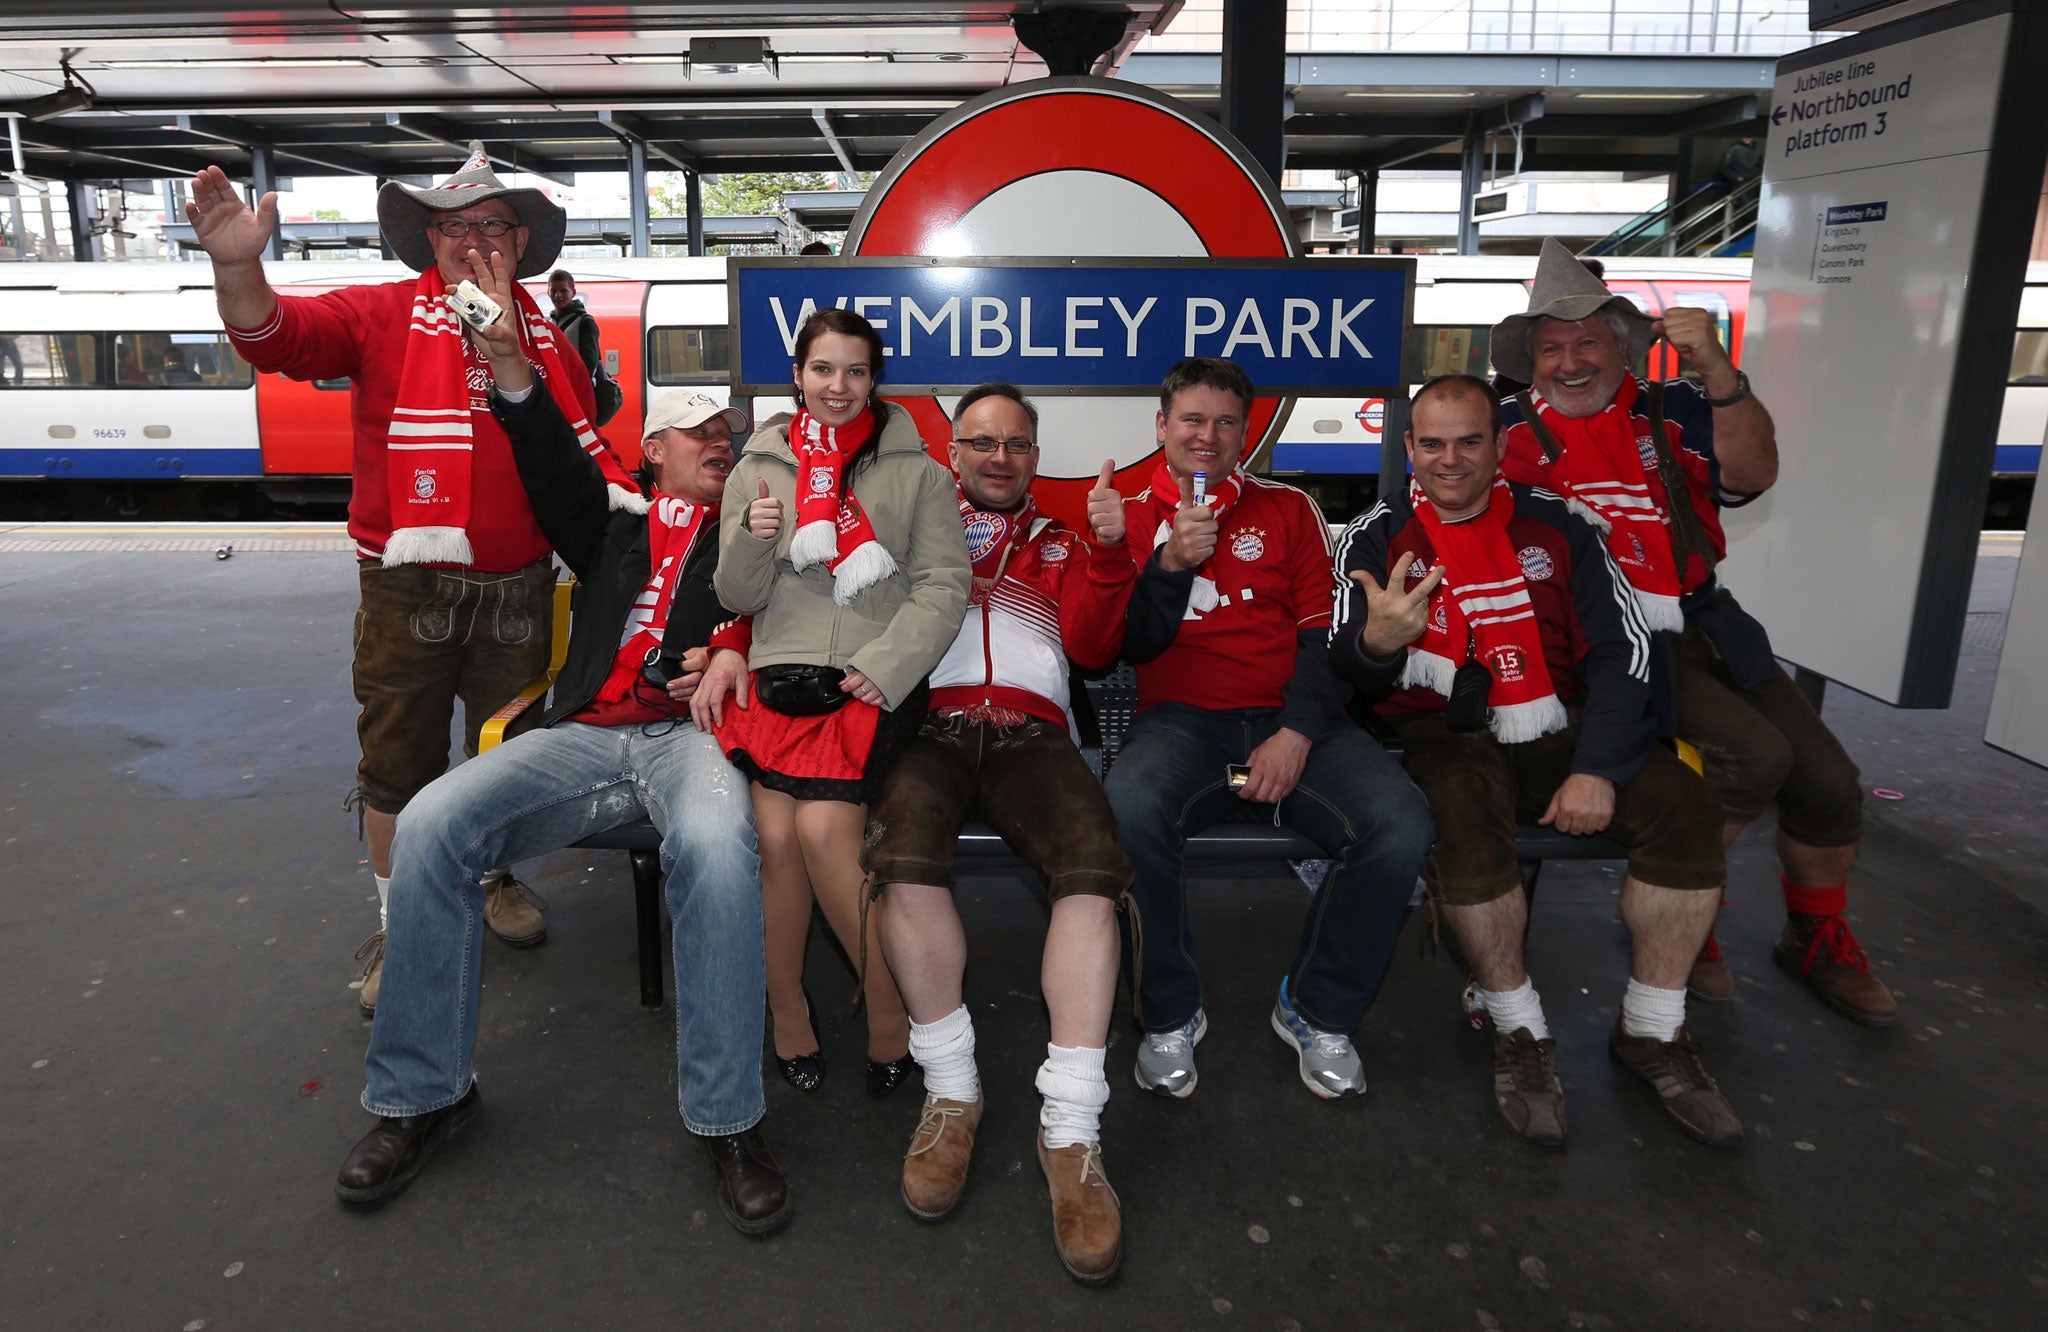 Not here for the beer: Bayern Munich fans in London